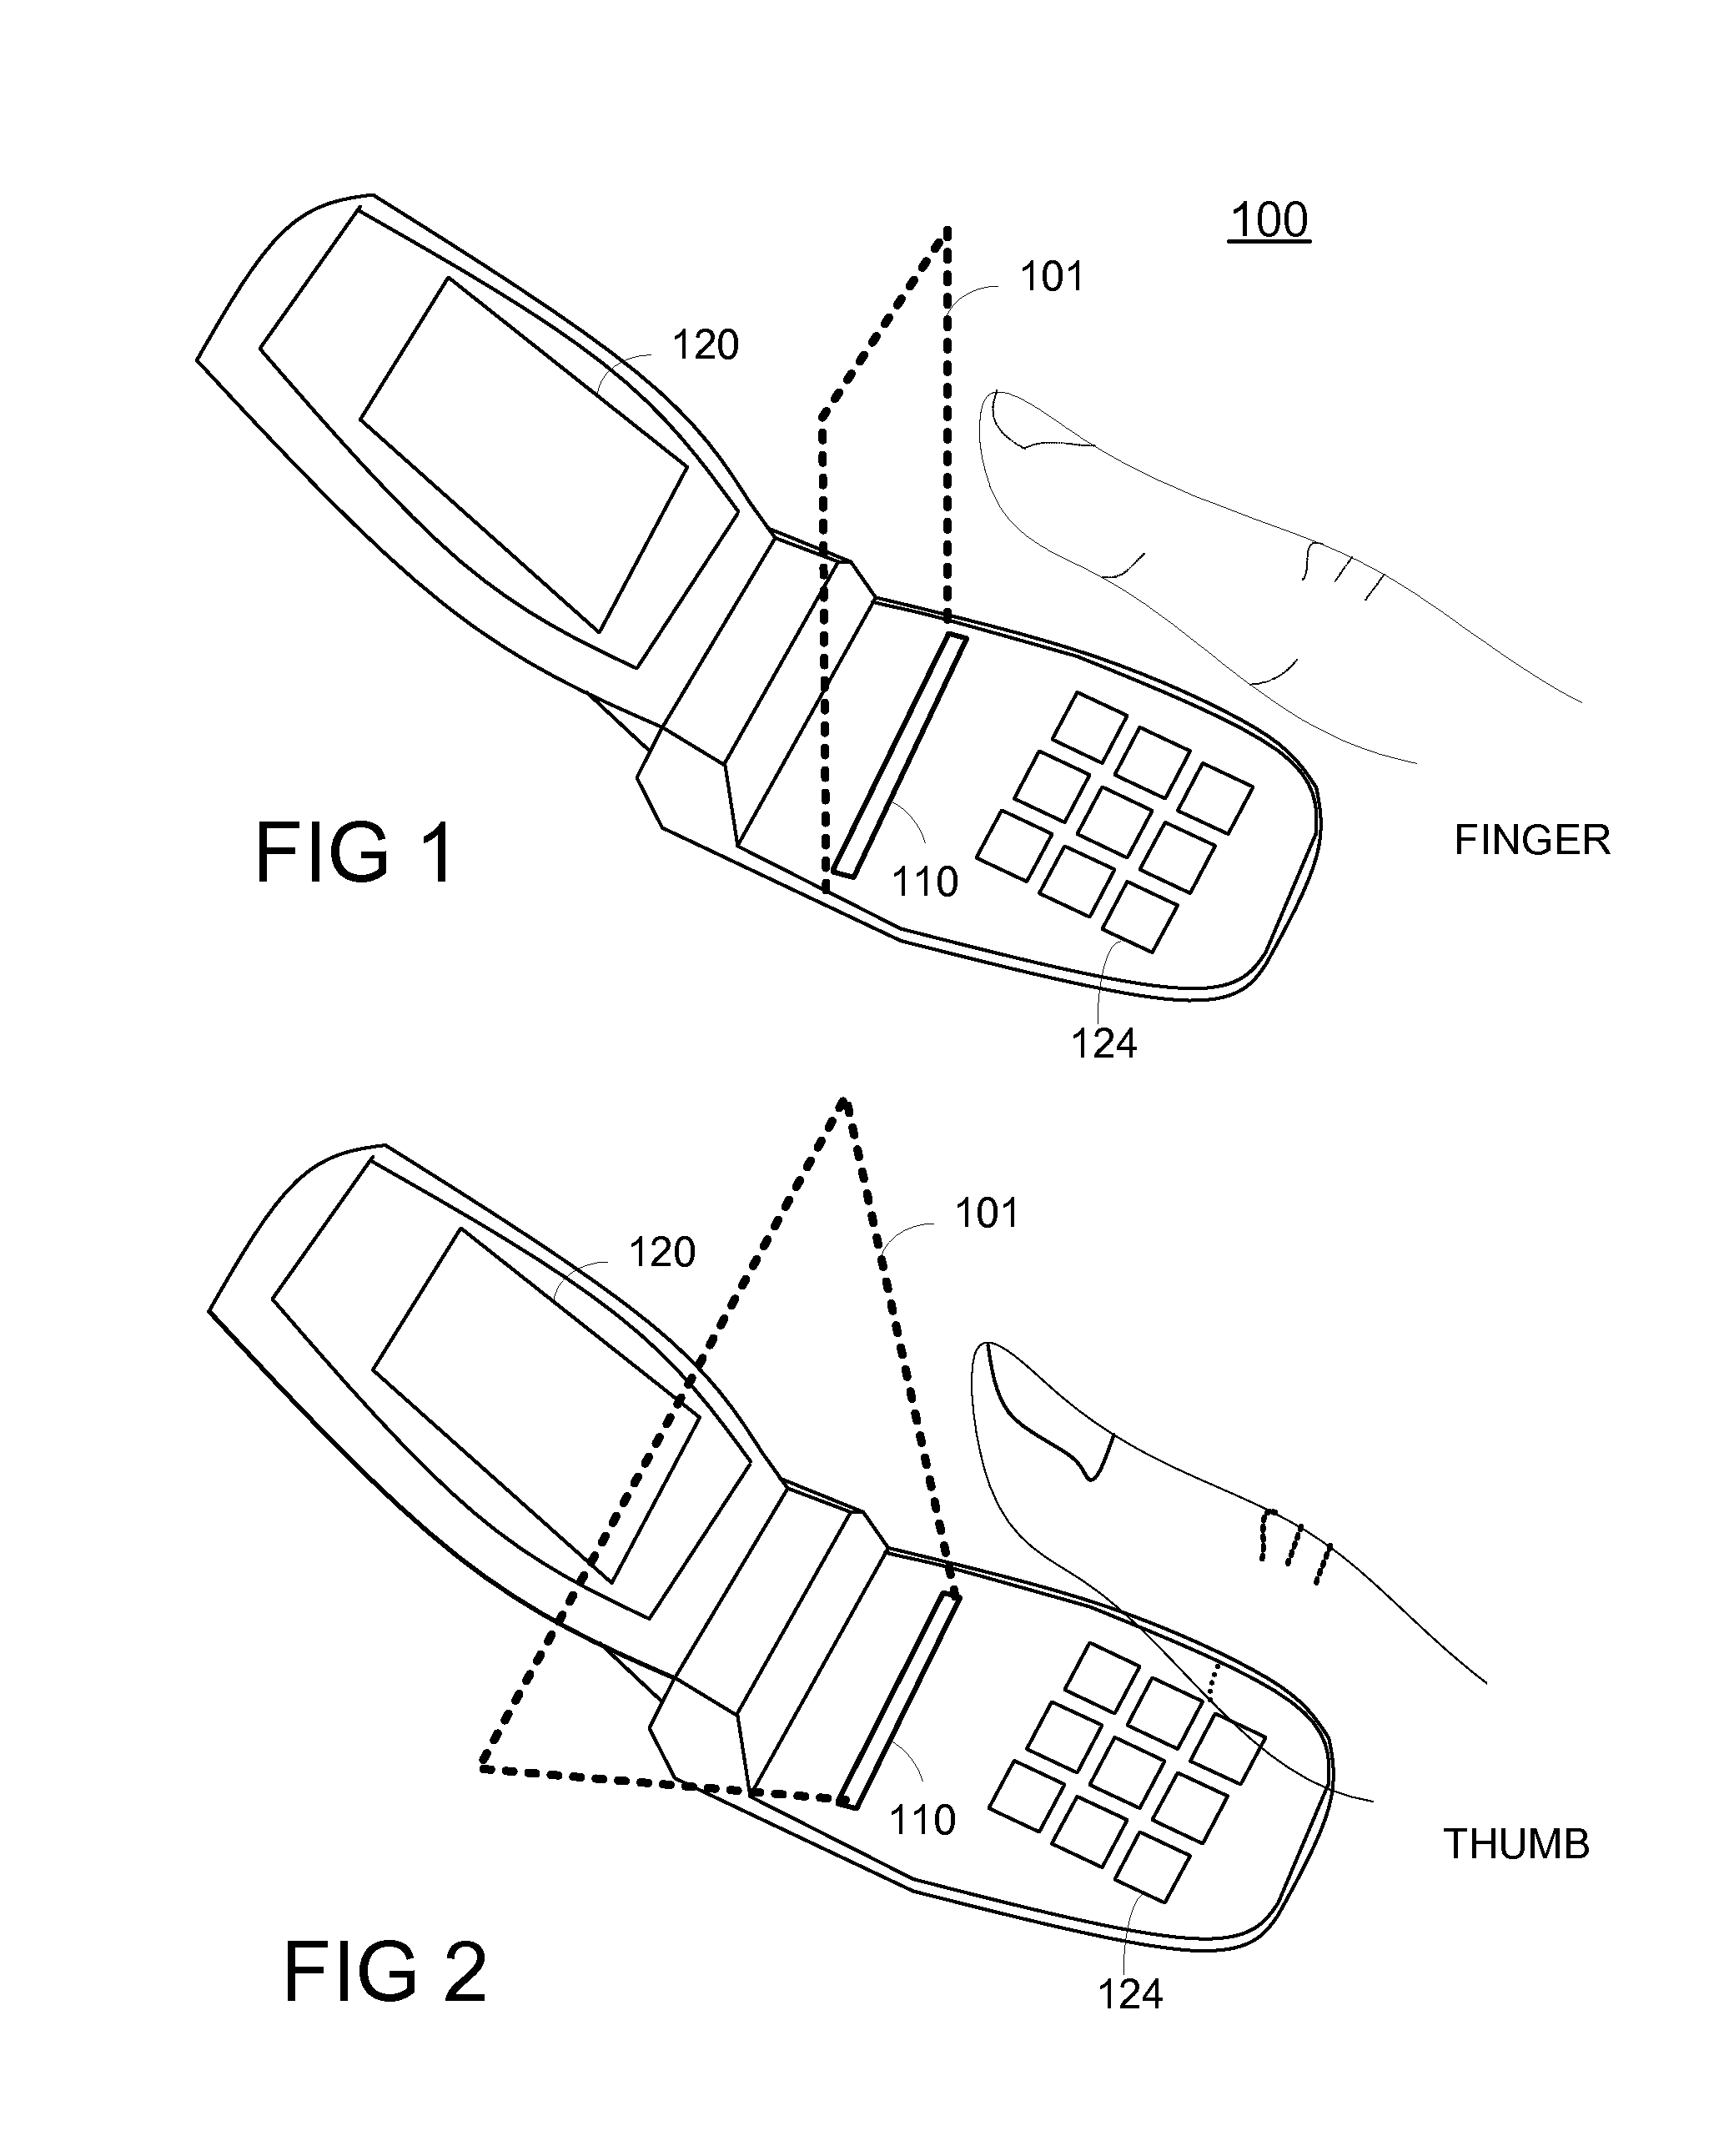 Method and apparatus for touchless control of a device